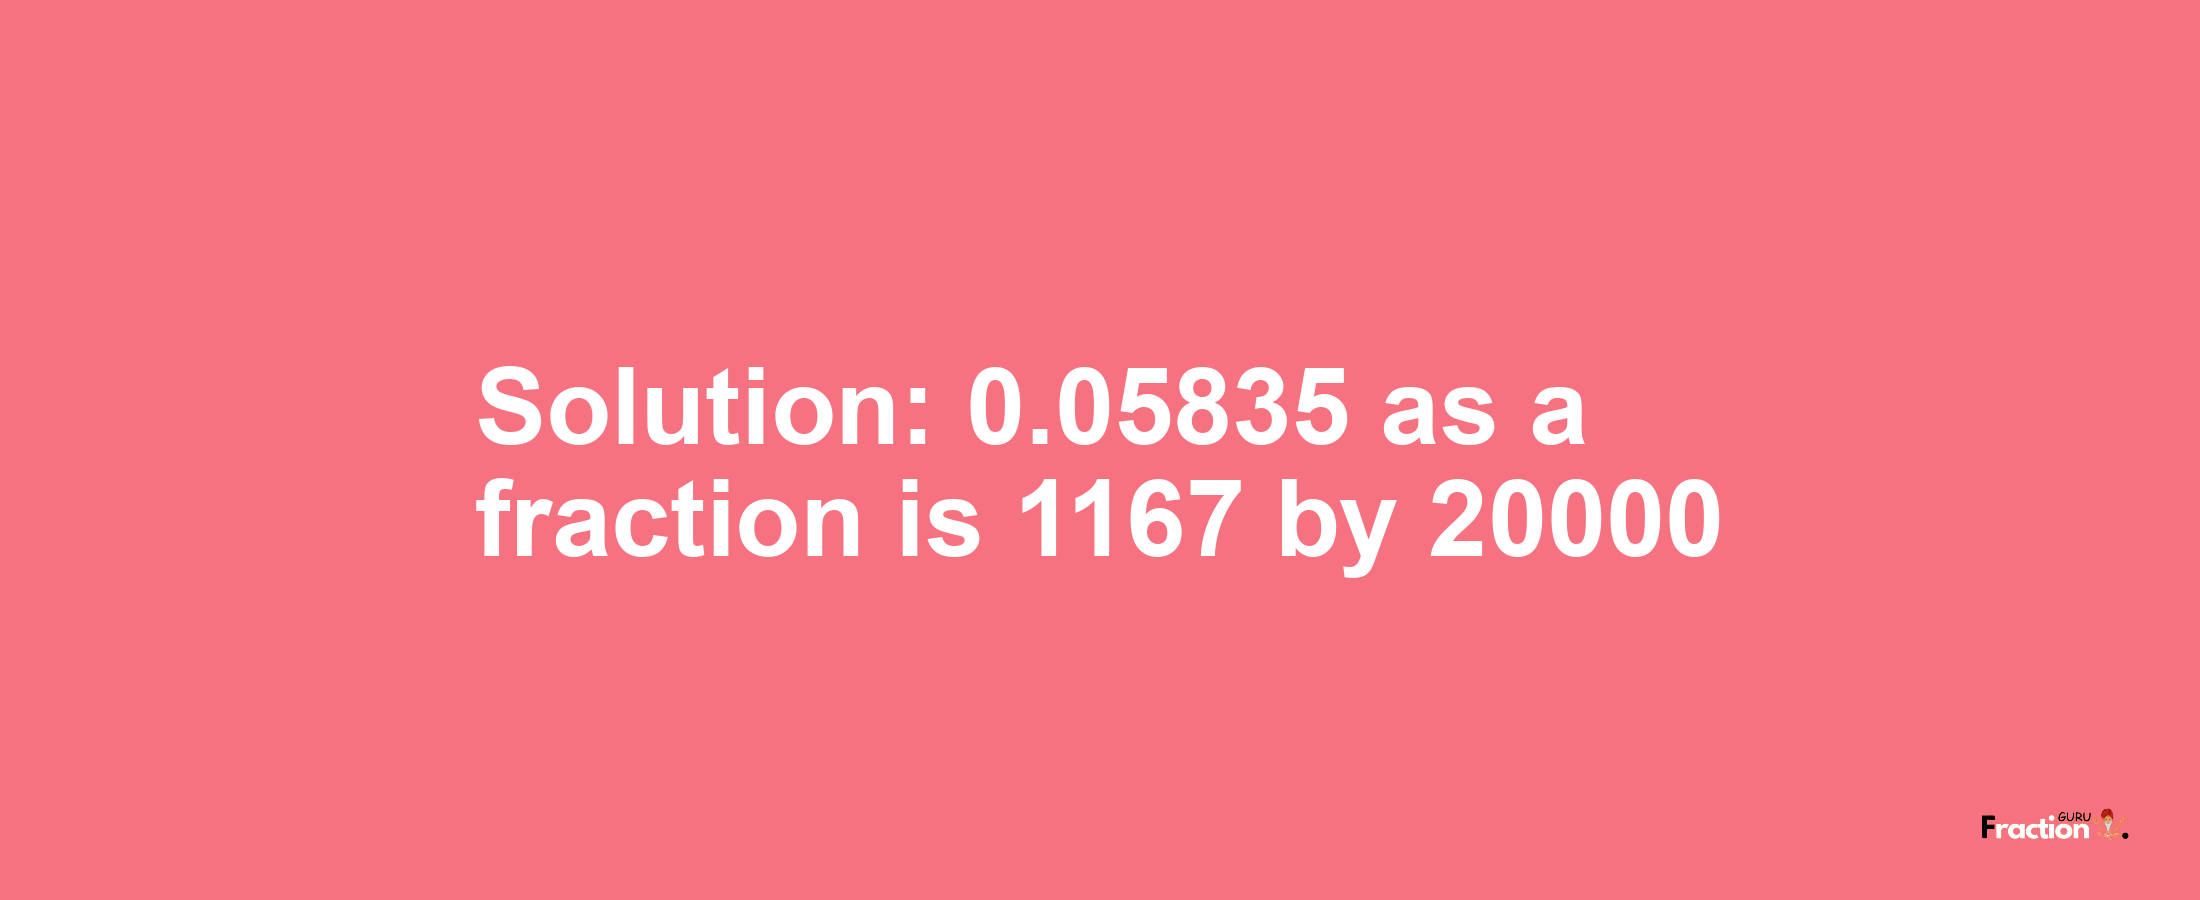 Solution:0.05835 as a fraction is 1167/20000